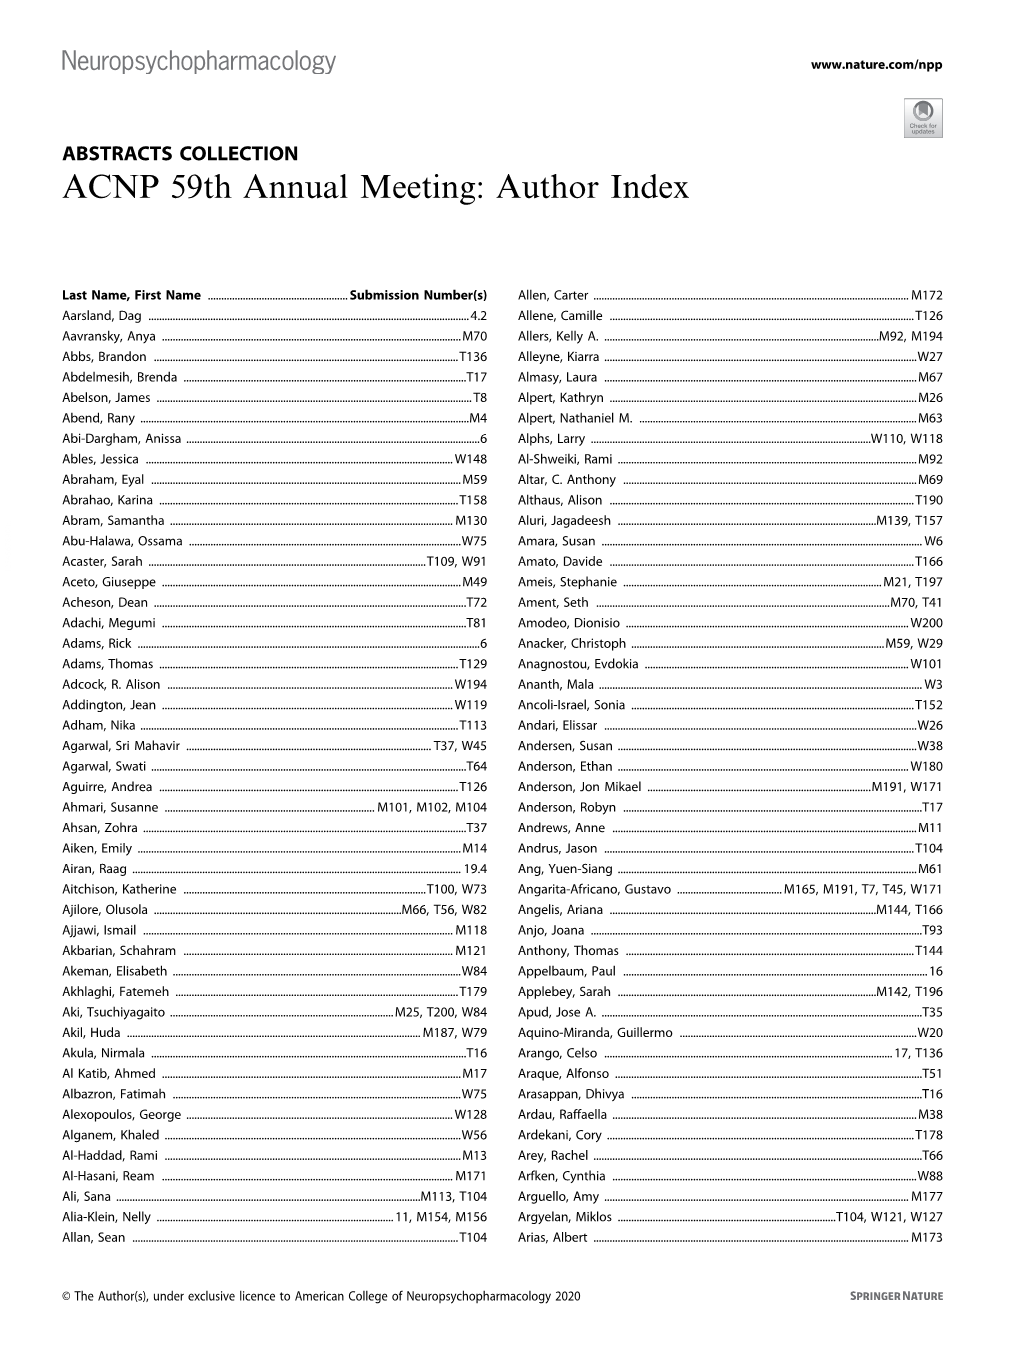 ACNP 59Th Annual Meeting: Author Index